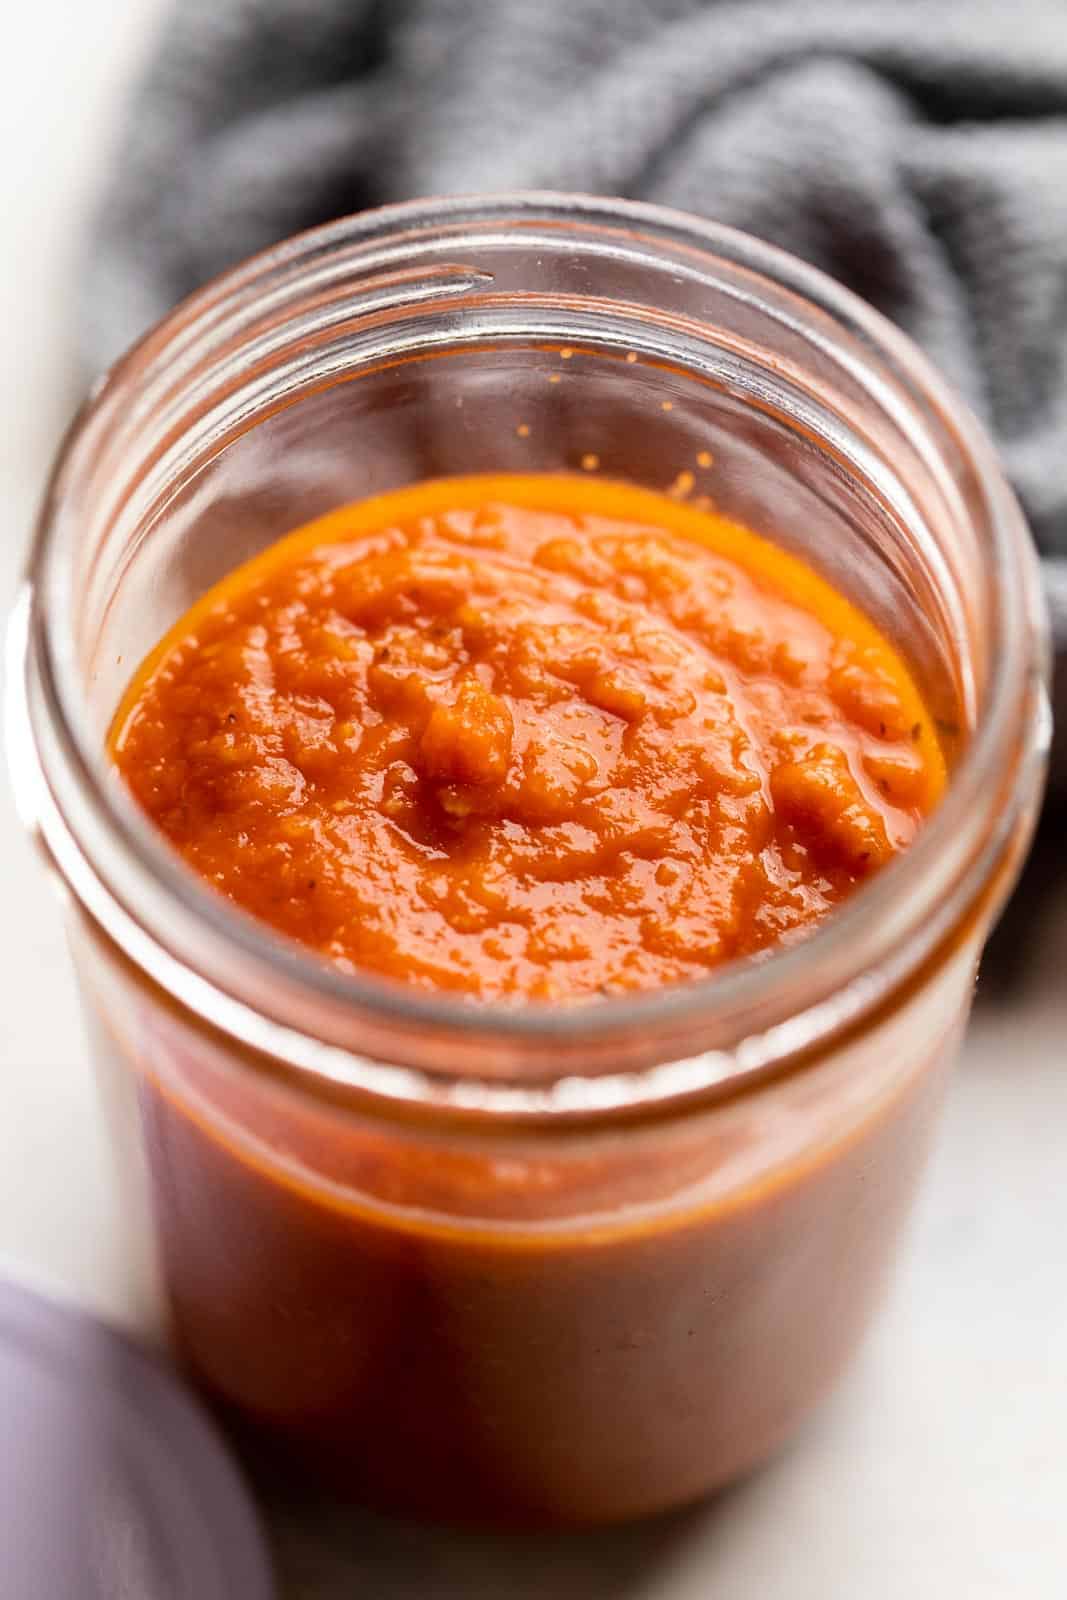 Cooked pasta sauce in a jar ready to be stored